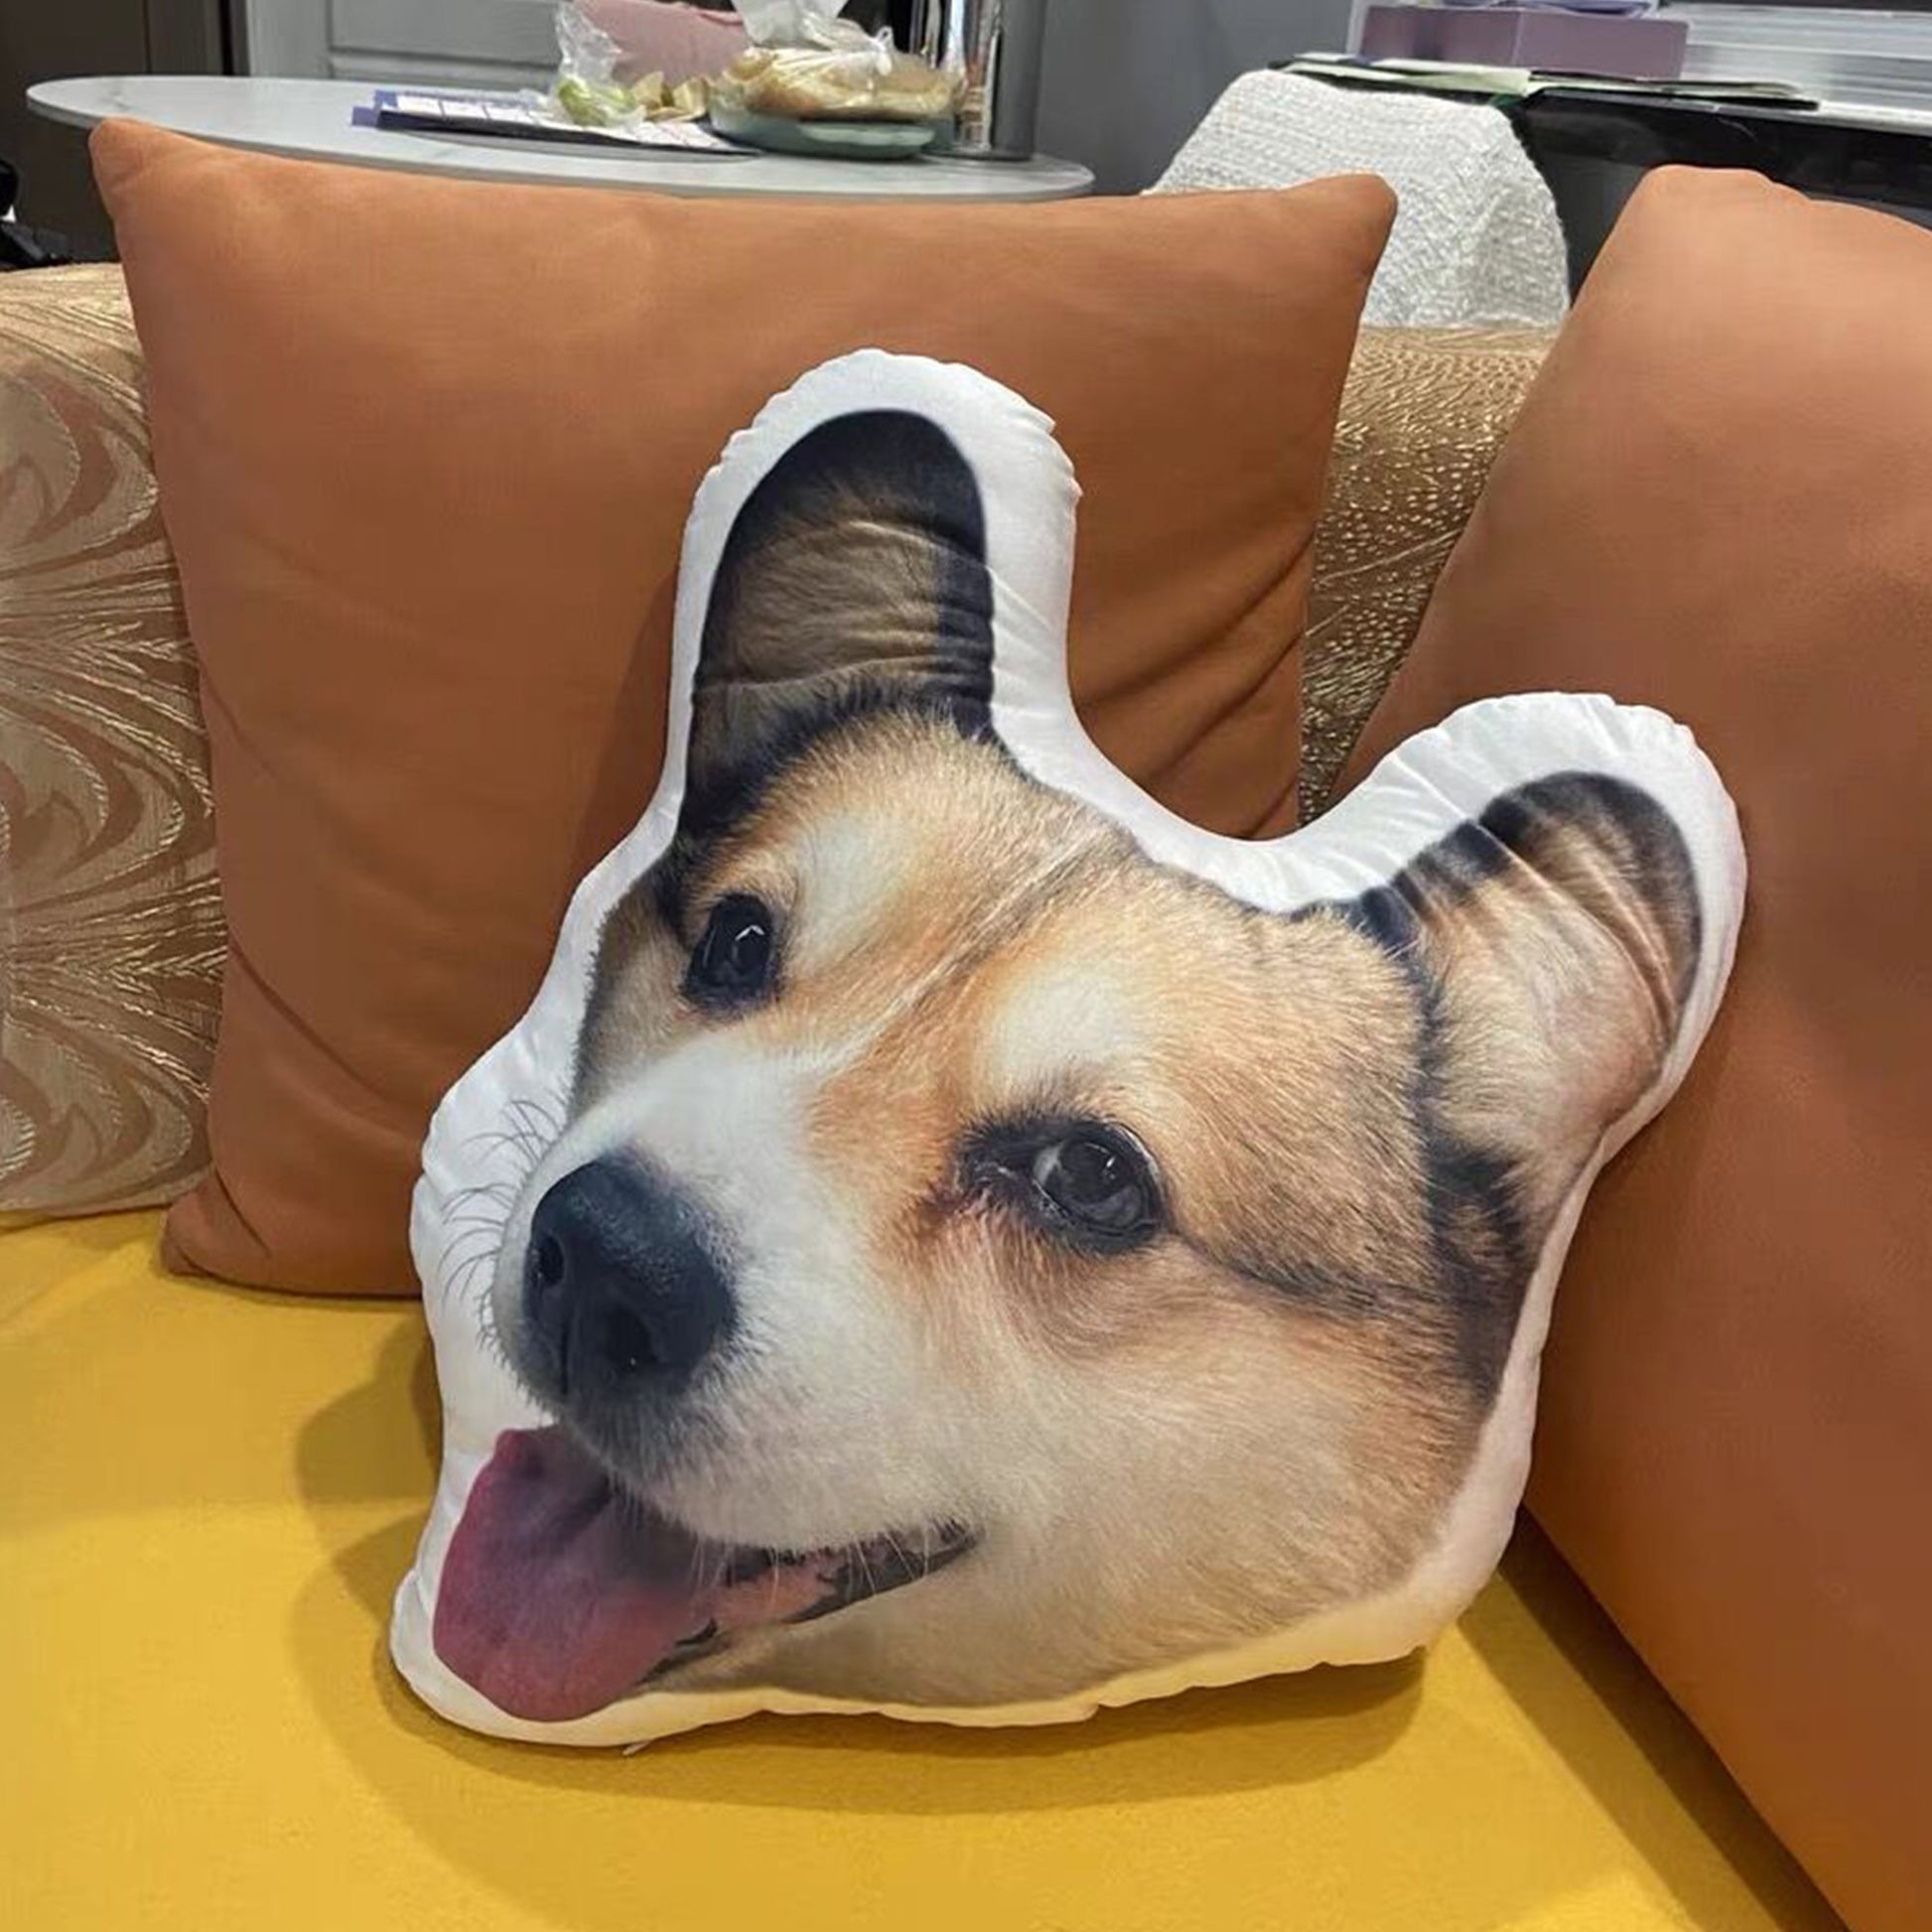 Personalized body pillow featuring an adorable puppy face printed on it